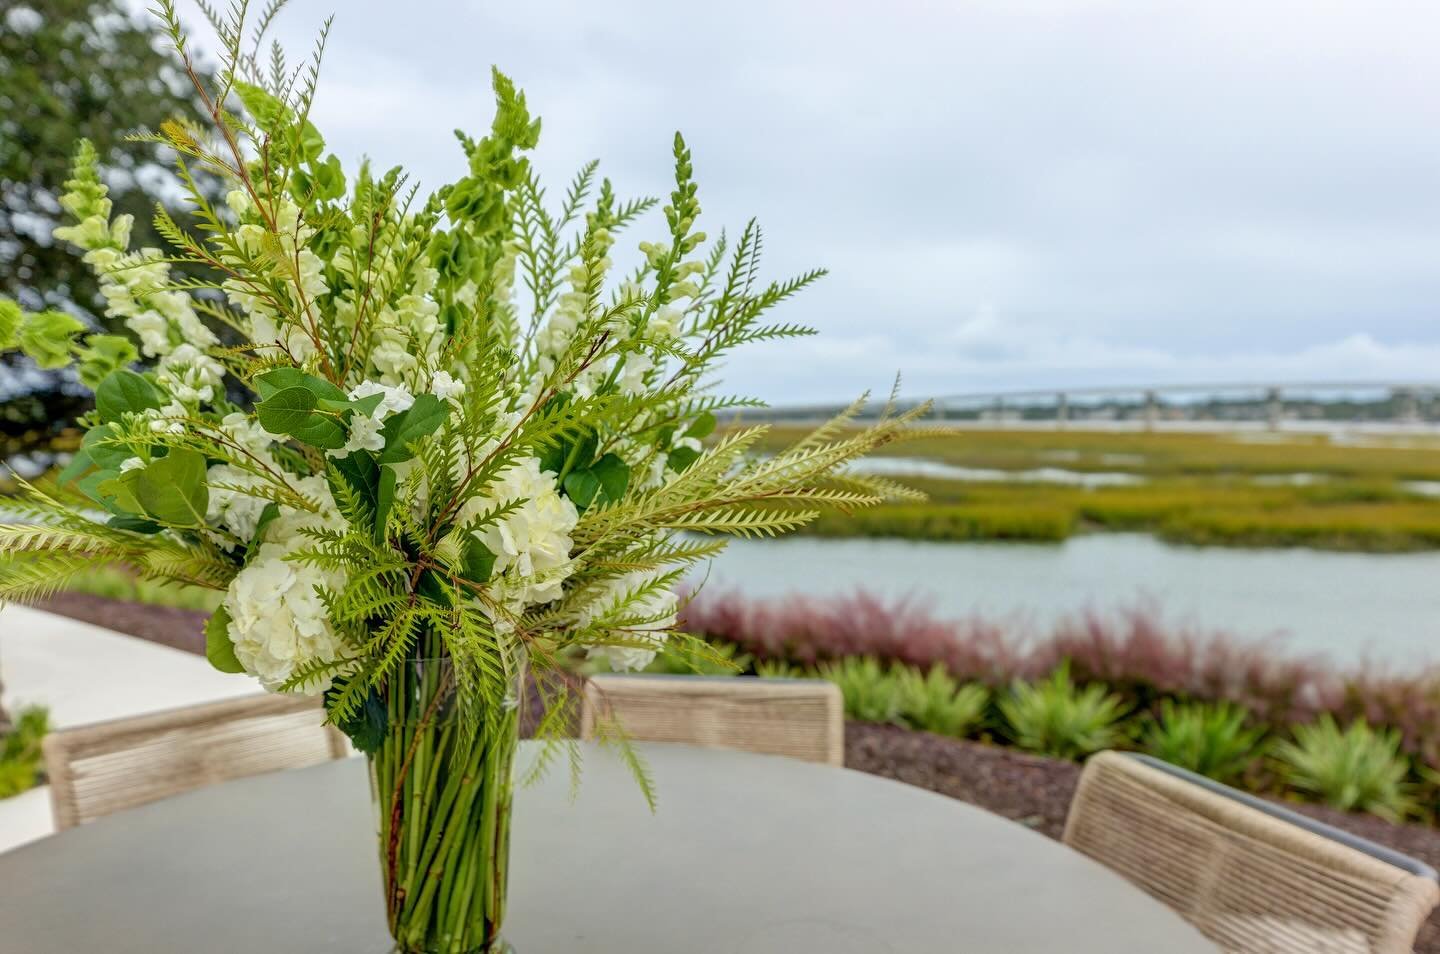 Happy National Gardening Day! Those April showers are certainly bringing May flowers&hellip; time to get out there &amp; care for your yard &amp; garden! 🪴 

#homebuilder #nationalgardeningday #gardening #flowers #customhomes #beachfront #beachhouse